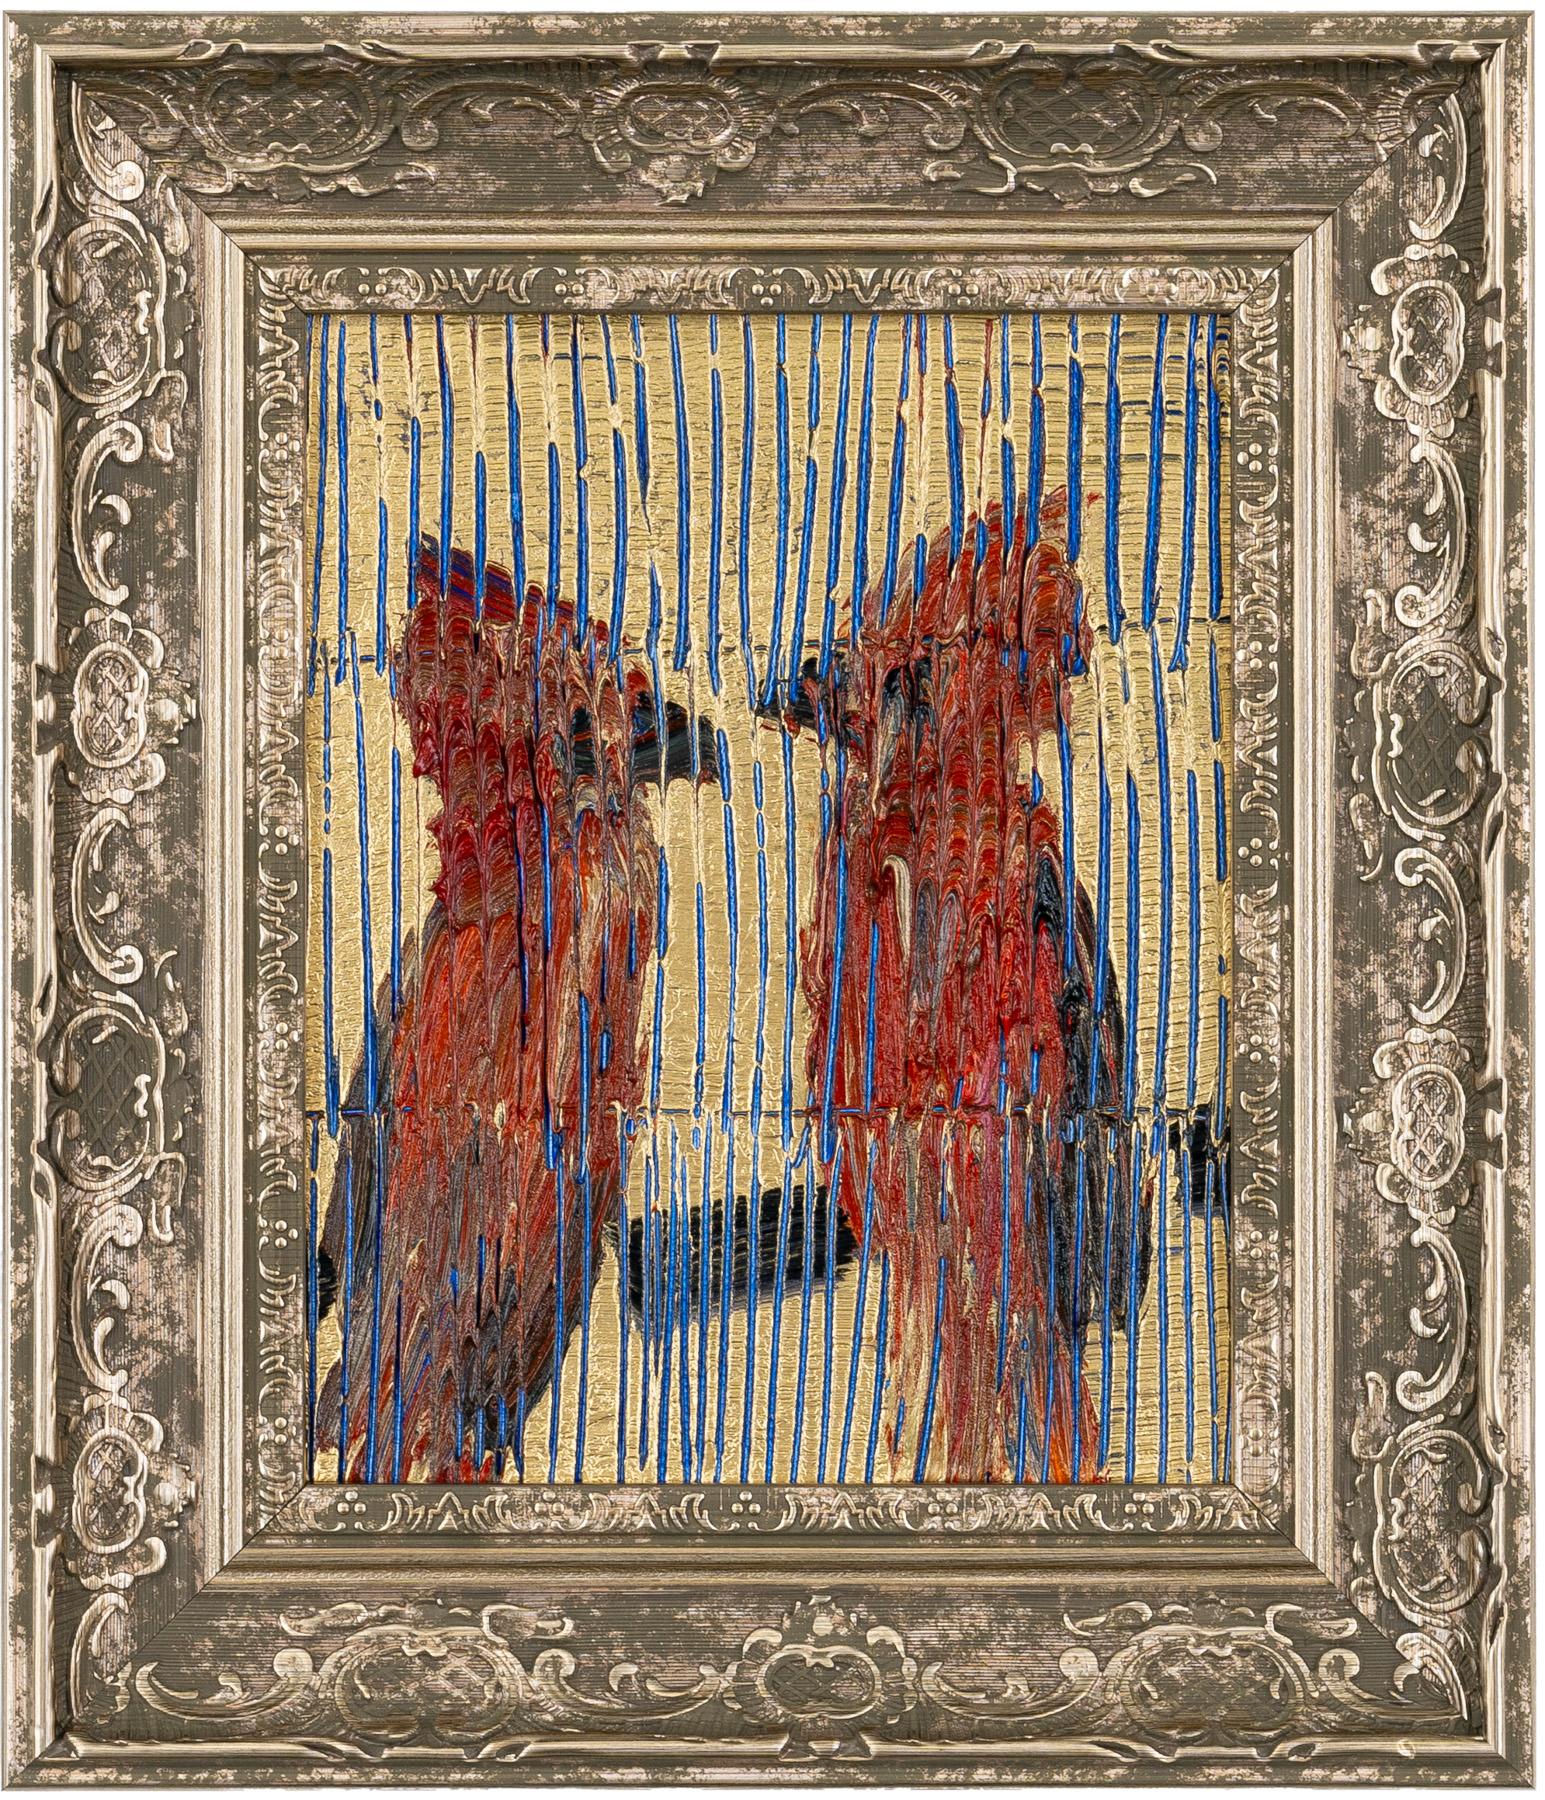 Hunt Slonem "Cardinals" Two Red Birds 
Two red Cardinal birds sitting on a branch over a gold metallic and blue etched background. Framed in an antique frame.

Unframed: 10 x 8 inches
Framed: 14.5 x 12.5 inches
*Painting is framed - Please note Hunt